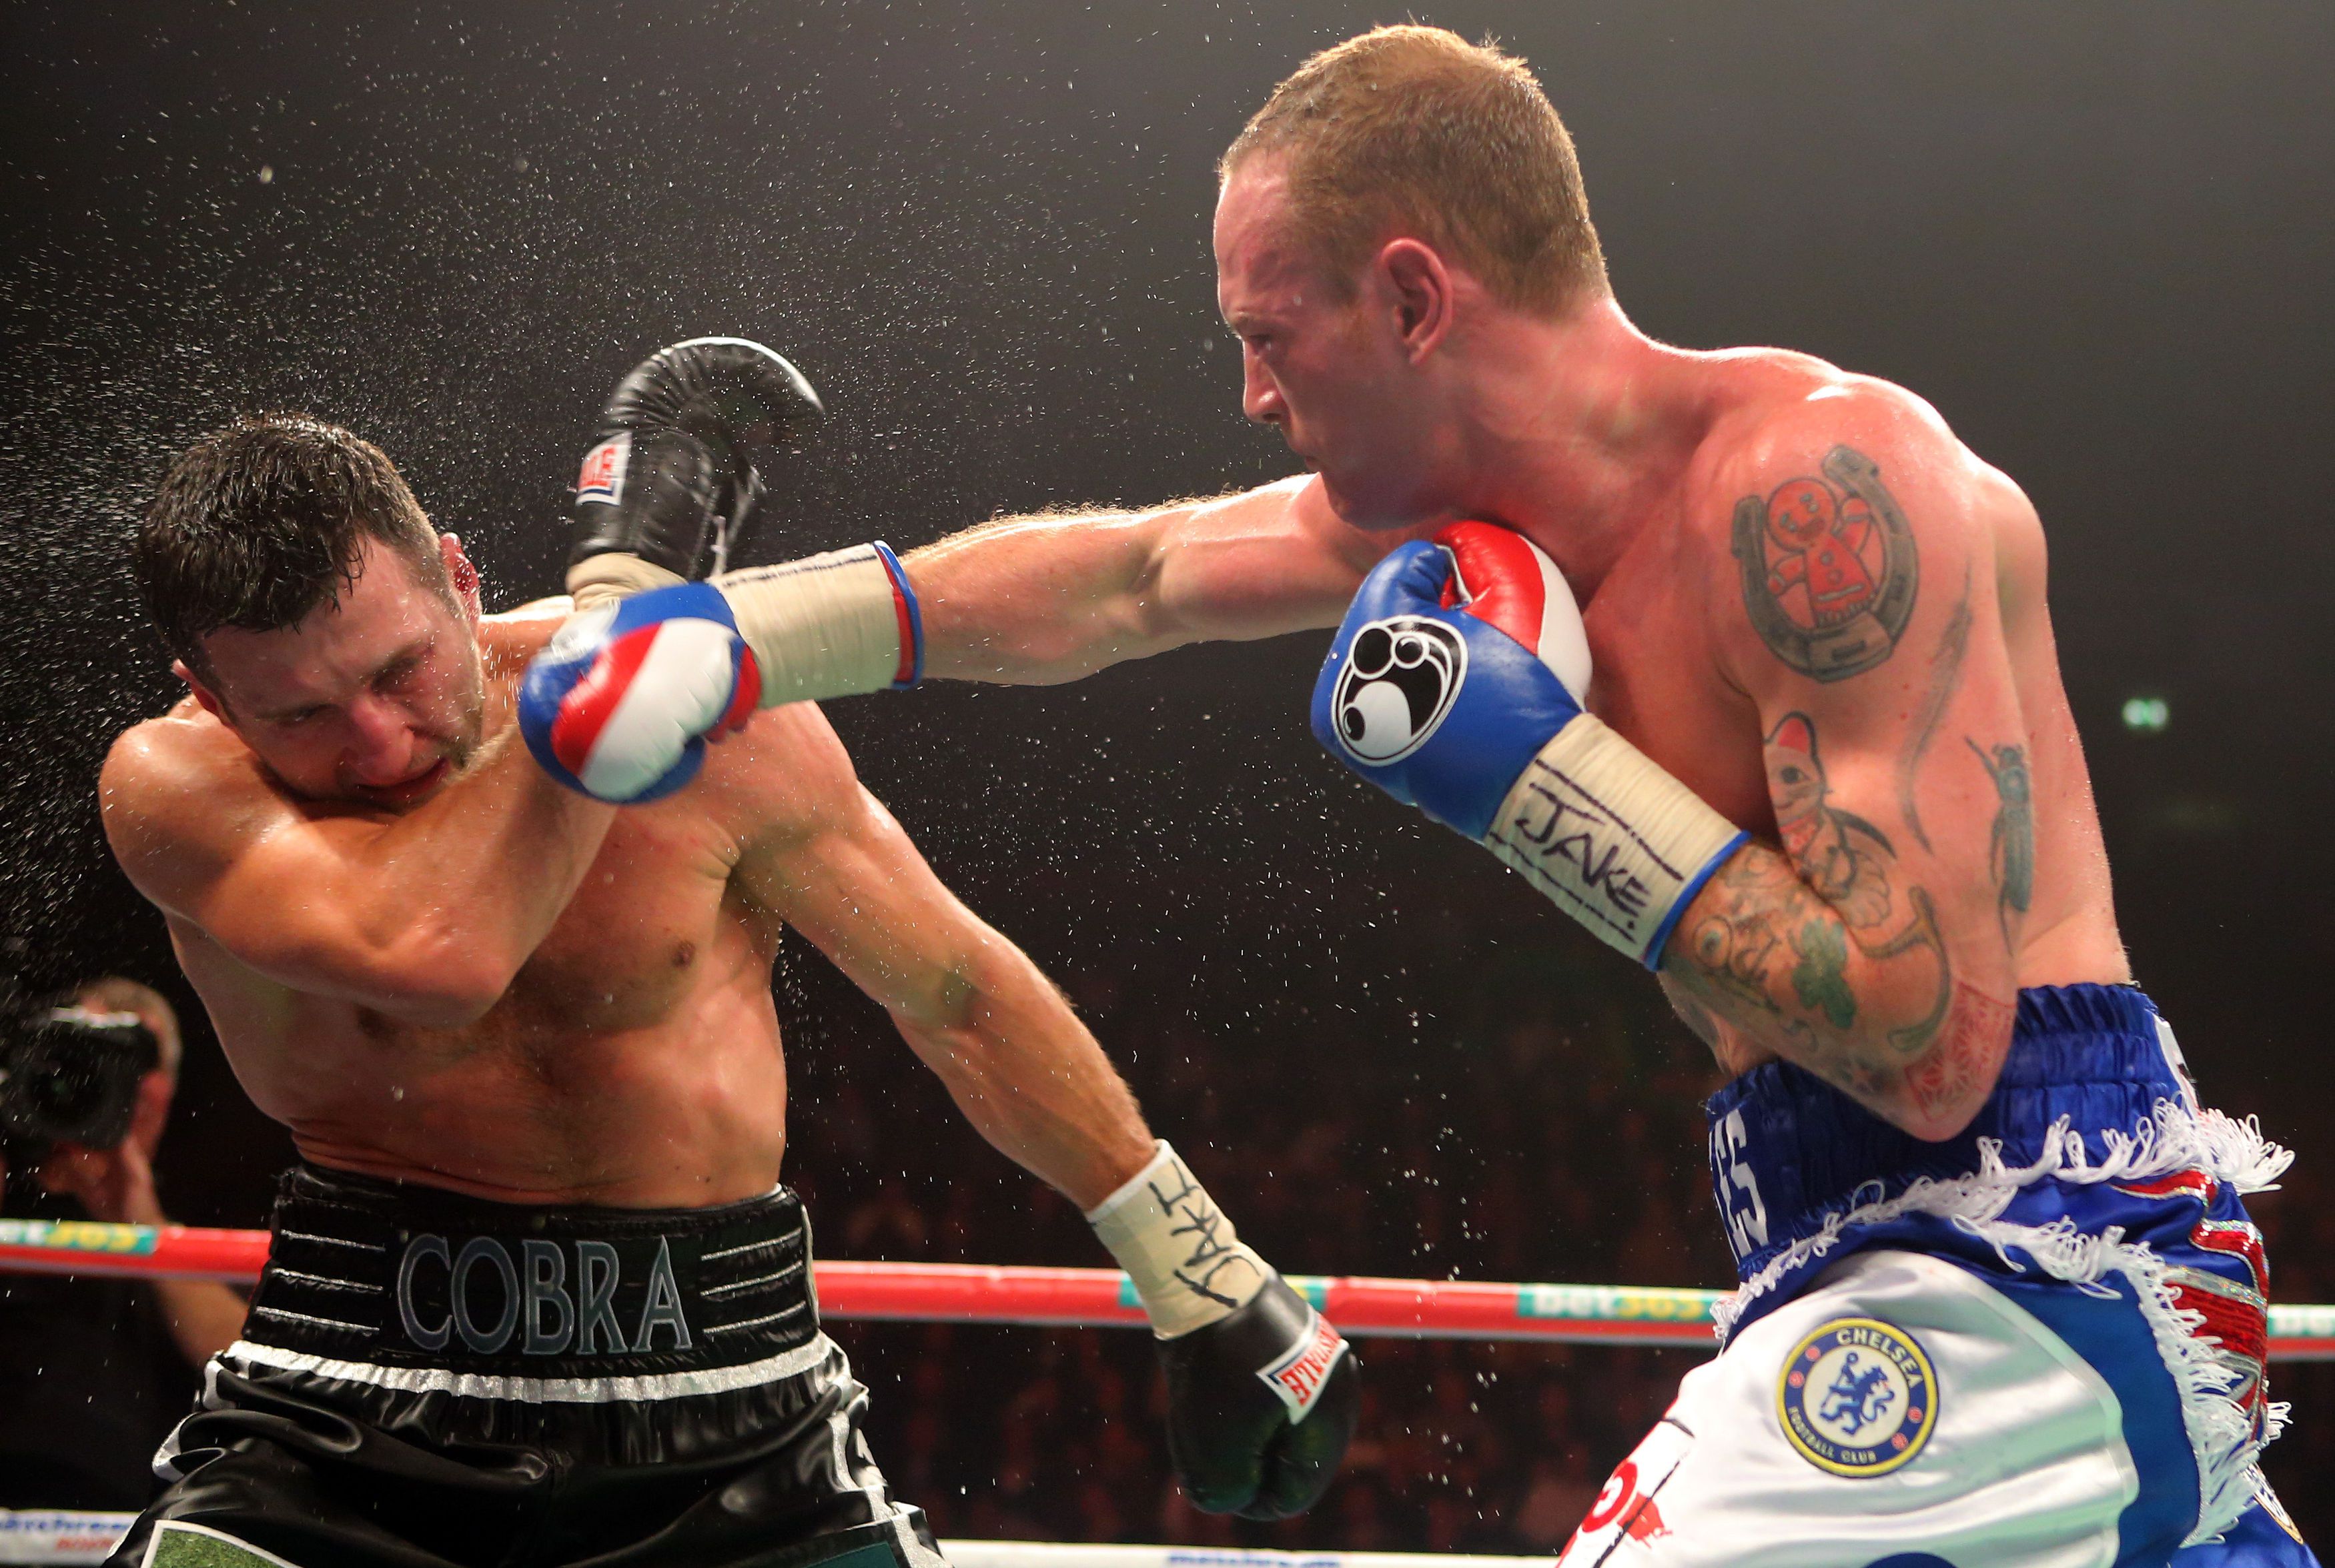 McRory: Groves will win quick. He knows he can hurt him